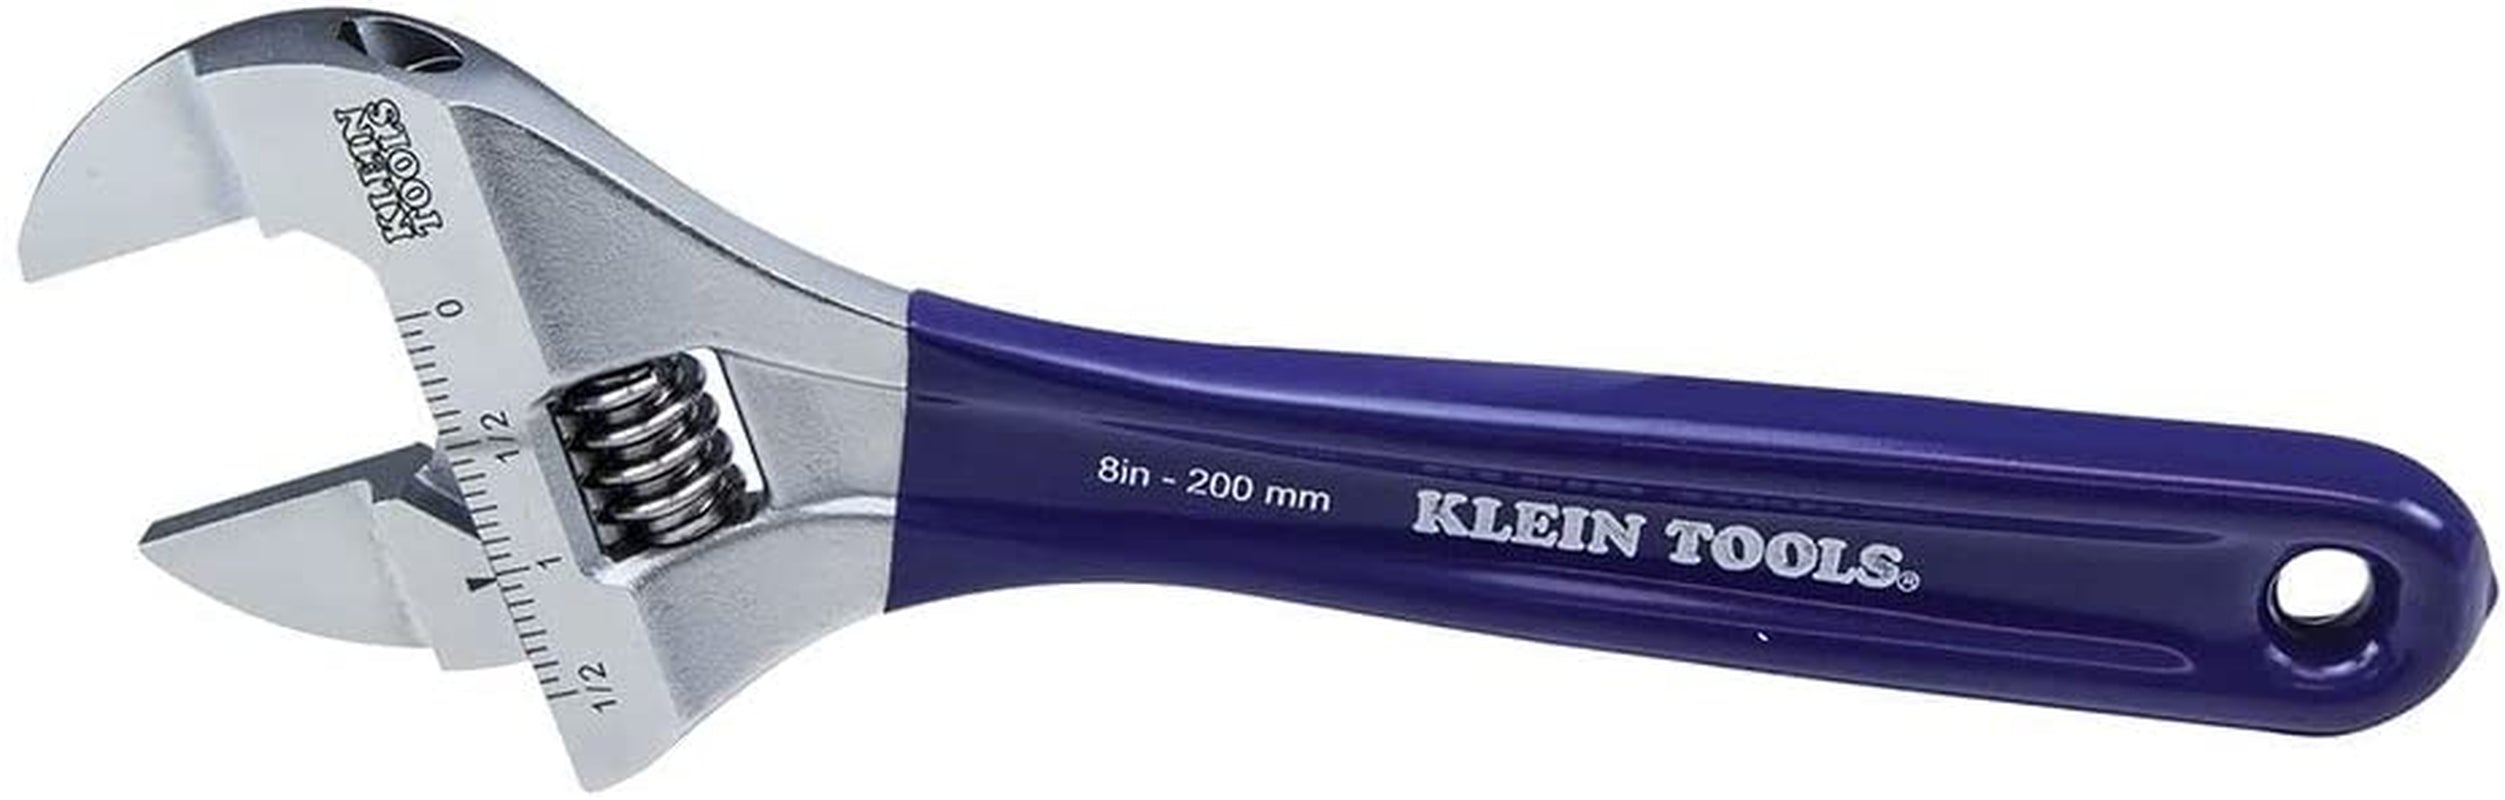 KLEIN TOOLS, Klein Tools D86936 Adjustable Wrench, Forged with Slimmer Jaw and a High Polish Chrome Finish, 8-Inch